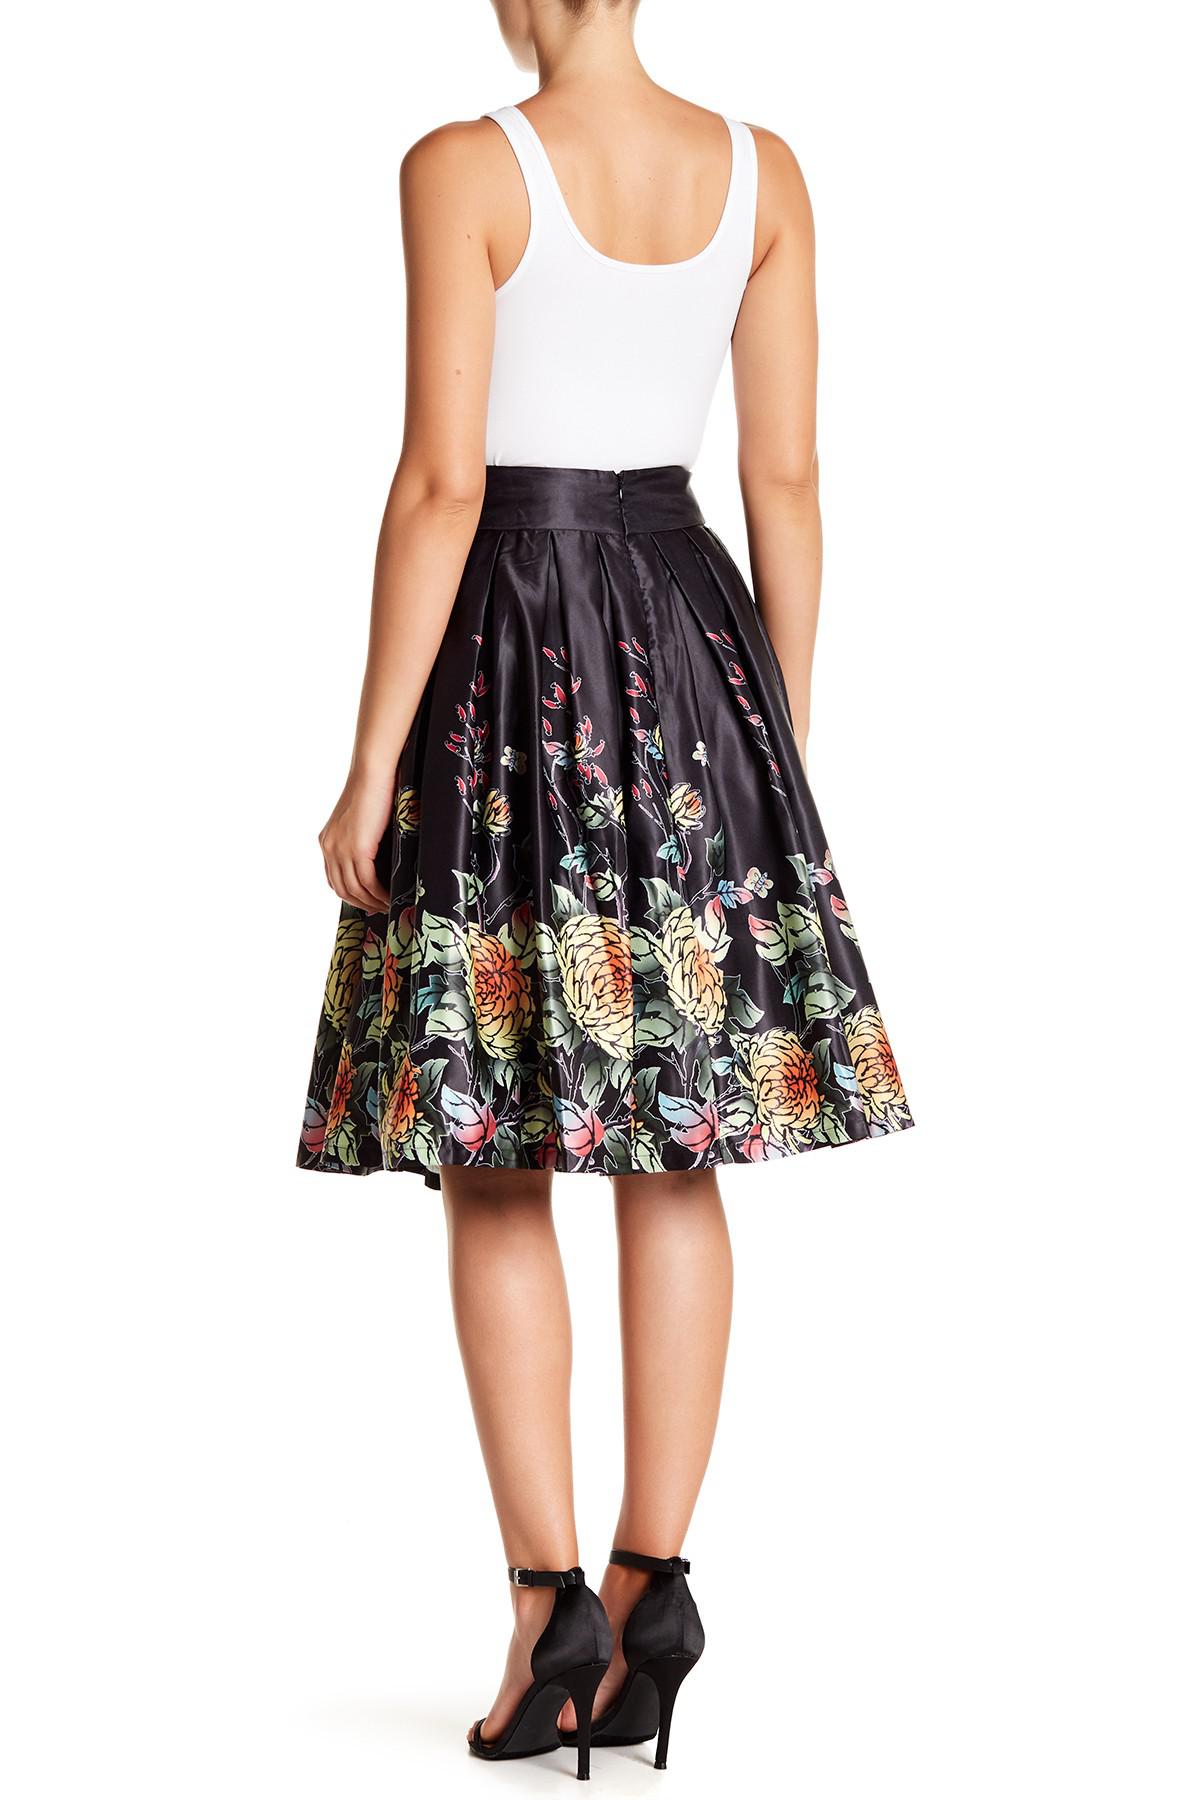 Gracia Synthetic Pleated Printed Skirt in Black - Lyst